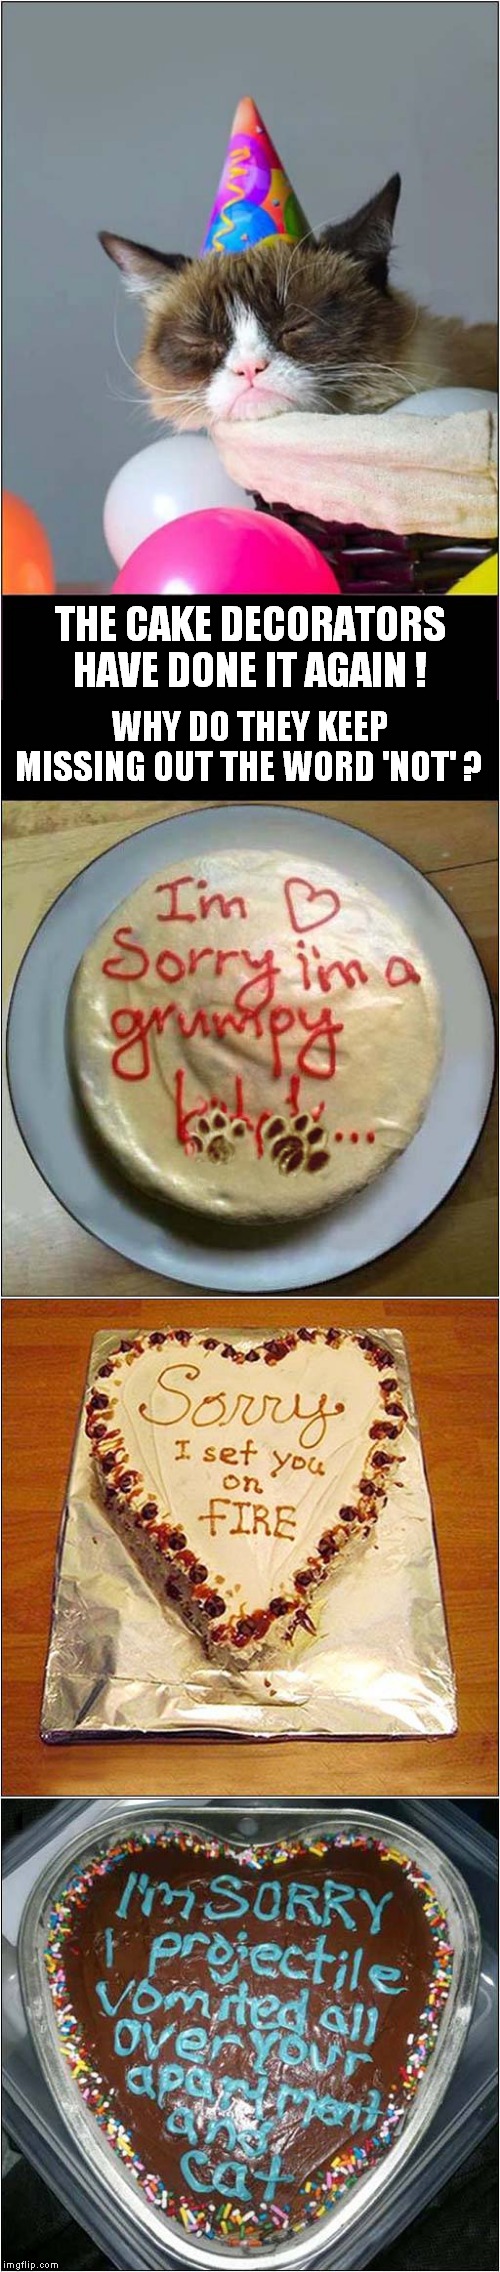 Grumpys Further Cake Disappointment | THE CAKE DECORATORS HAVE DONE IT AGAIN ! WHY DO THEY KEEP MISSING OUT THE WORD 'NOT' ? | image tagged in fun,grumpy cat,cakes | made w/ Imgflip meme maker